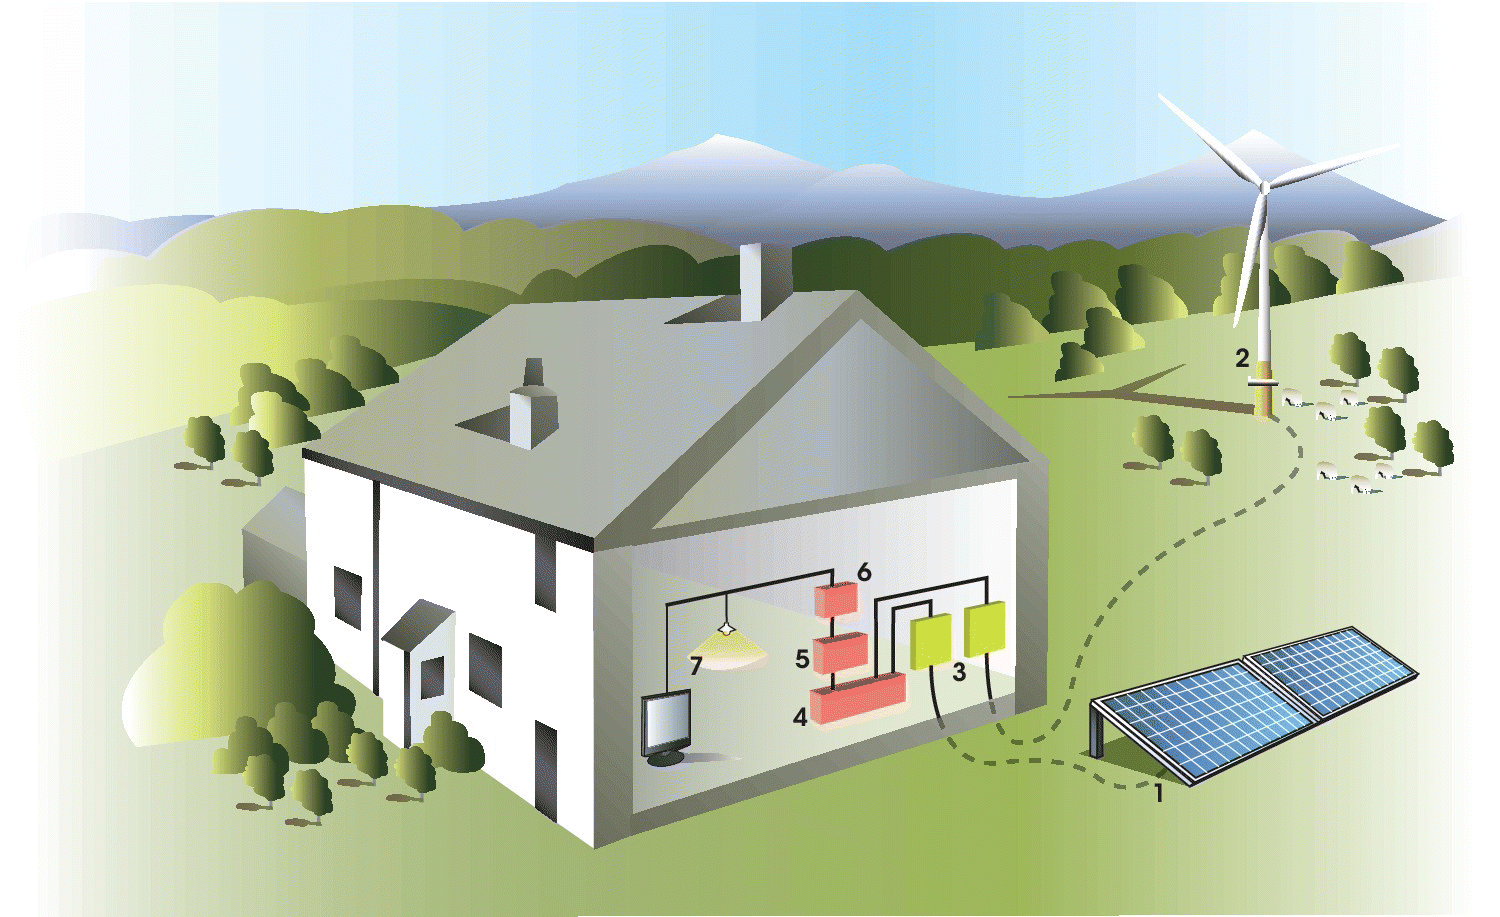 Illustration of a stand‐alone system for a farmhouse displaying a house with TV, lamp and other boxes connected to a wind turbine and a solar panel by dashed lines.